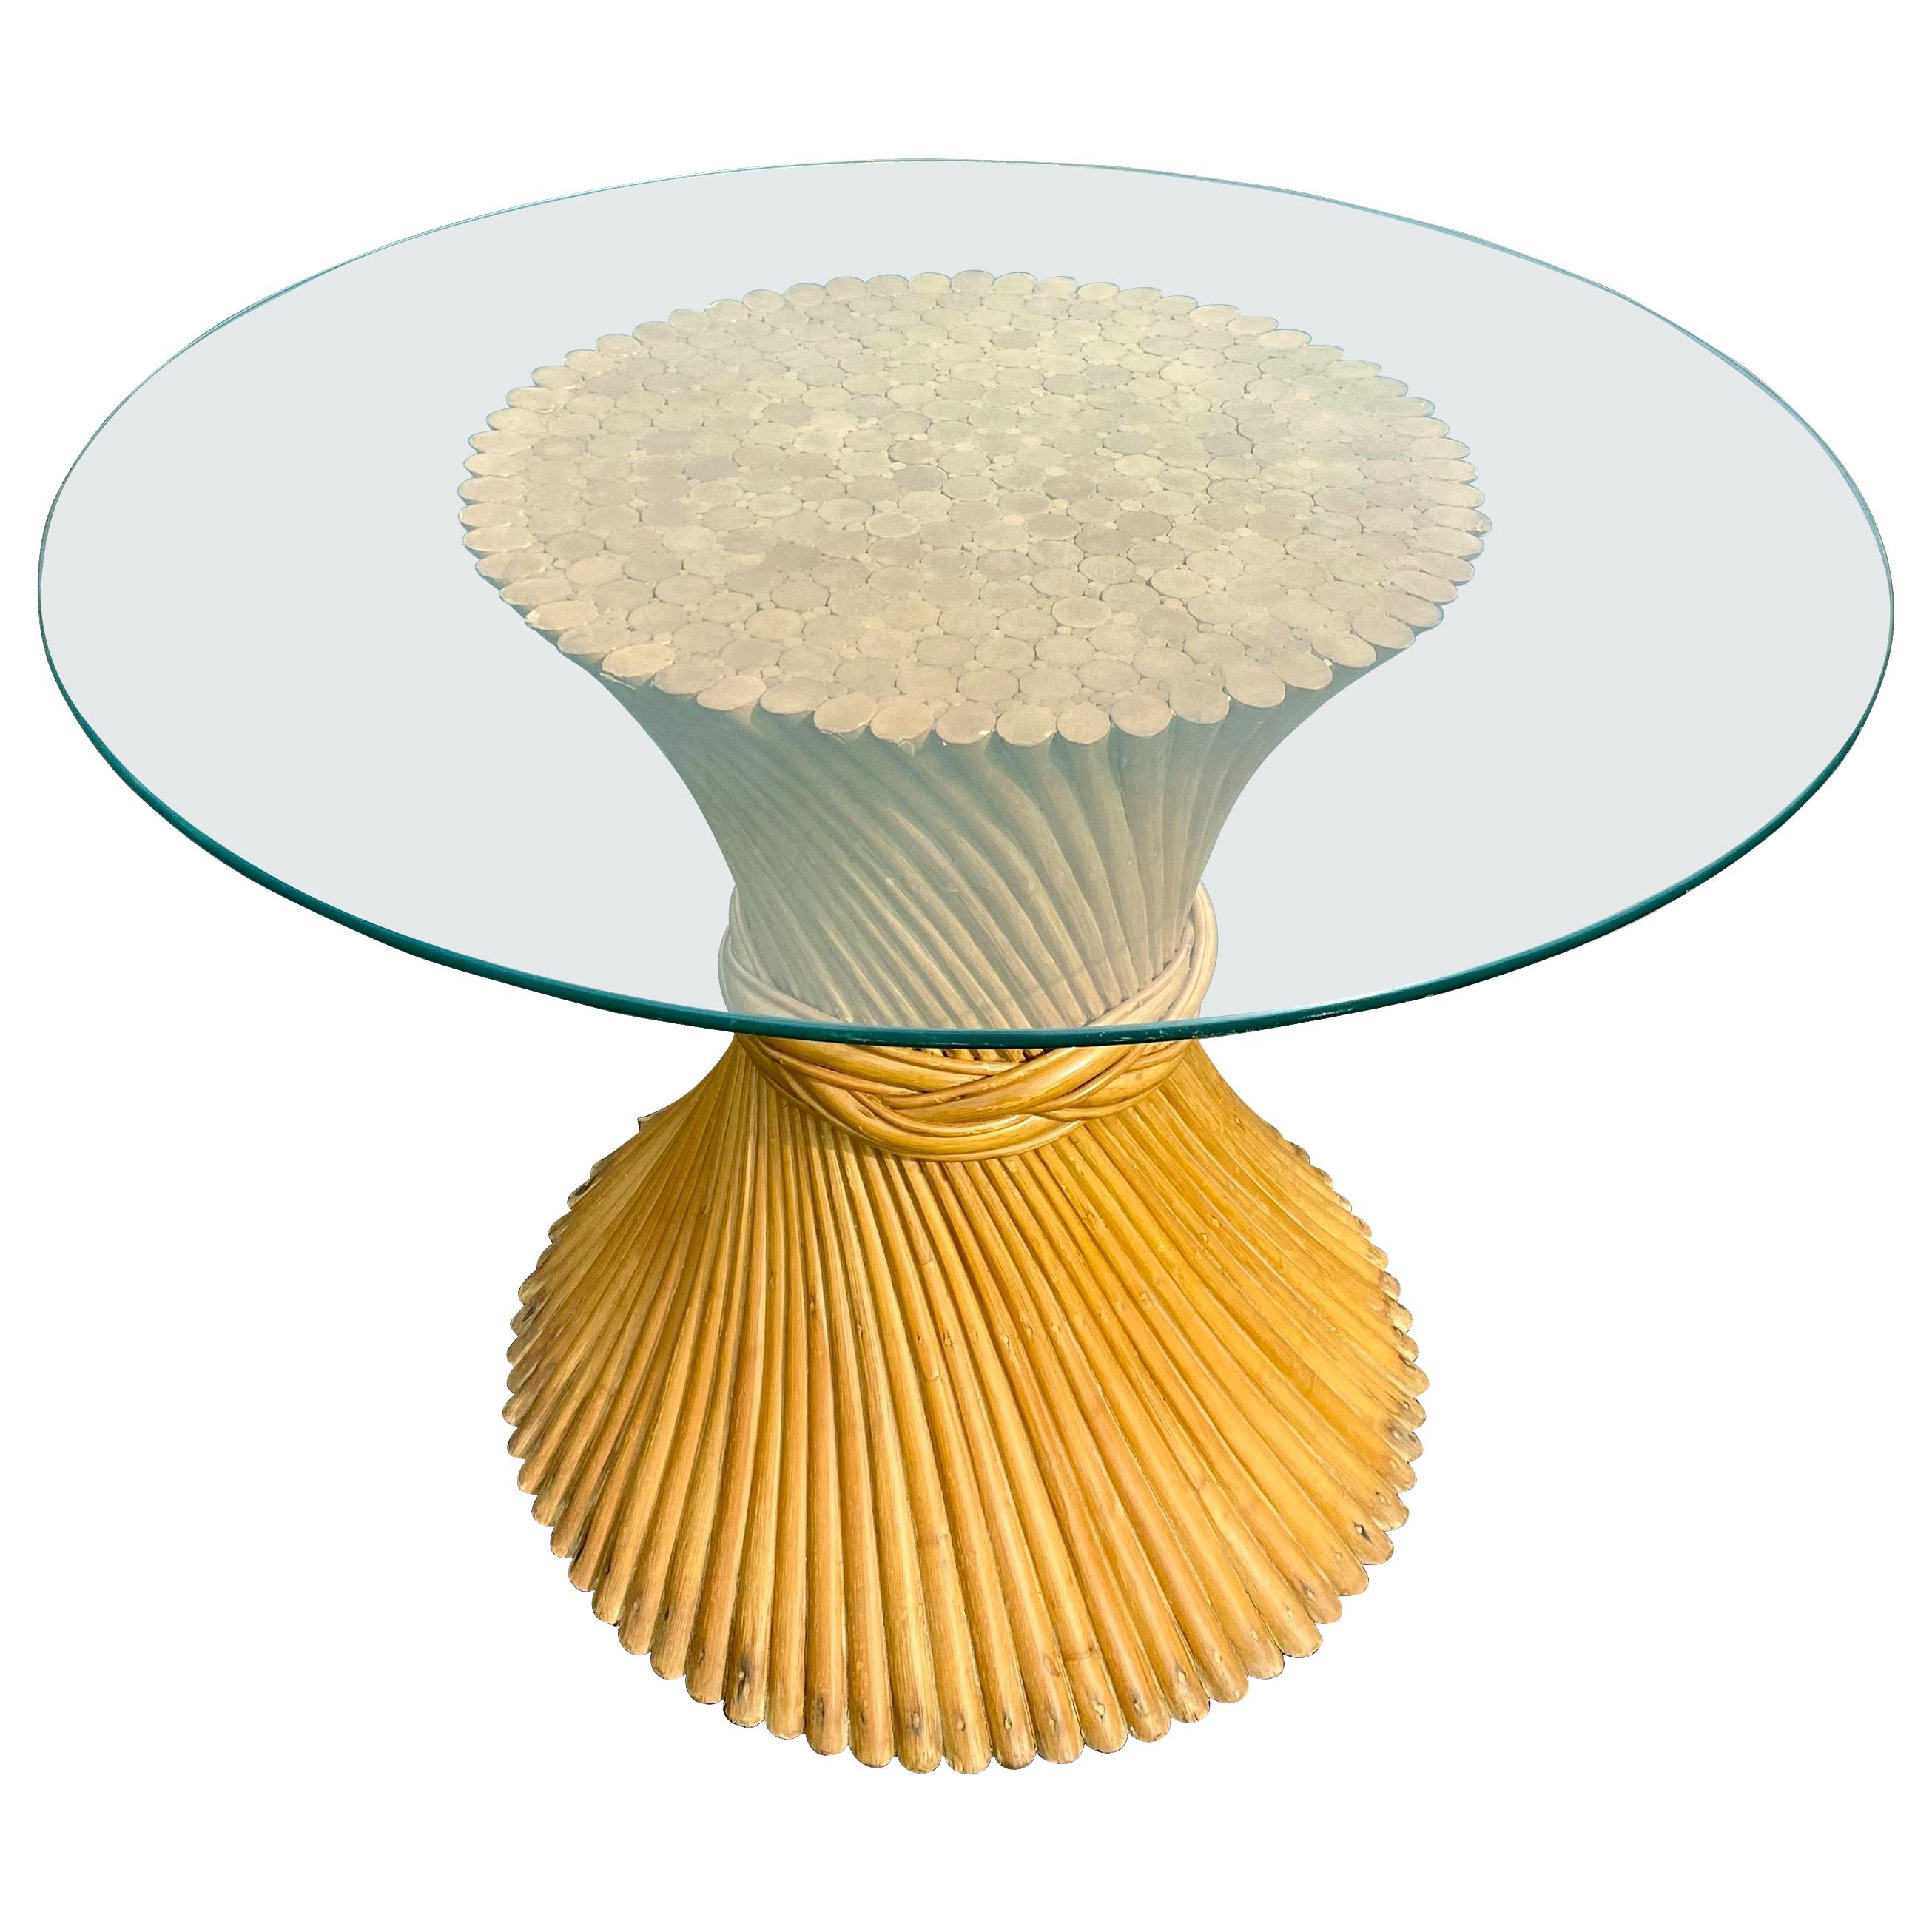 Sculptural Sheaf of Wheat Bamboo Rattan Dining Table, Hollywood Regency McGuire 